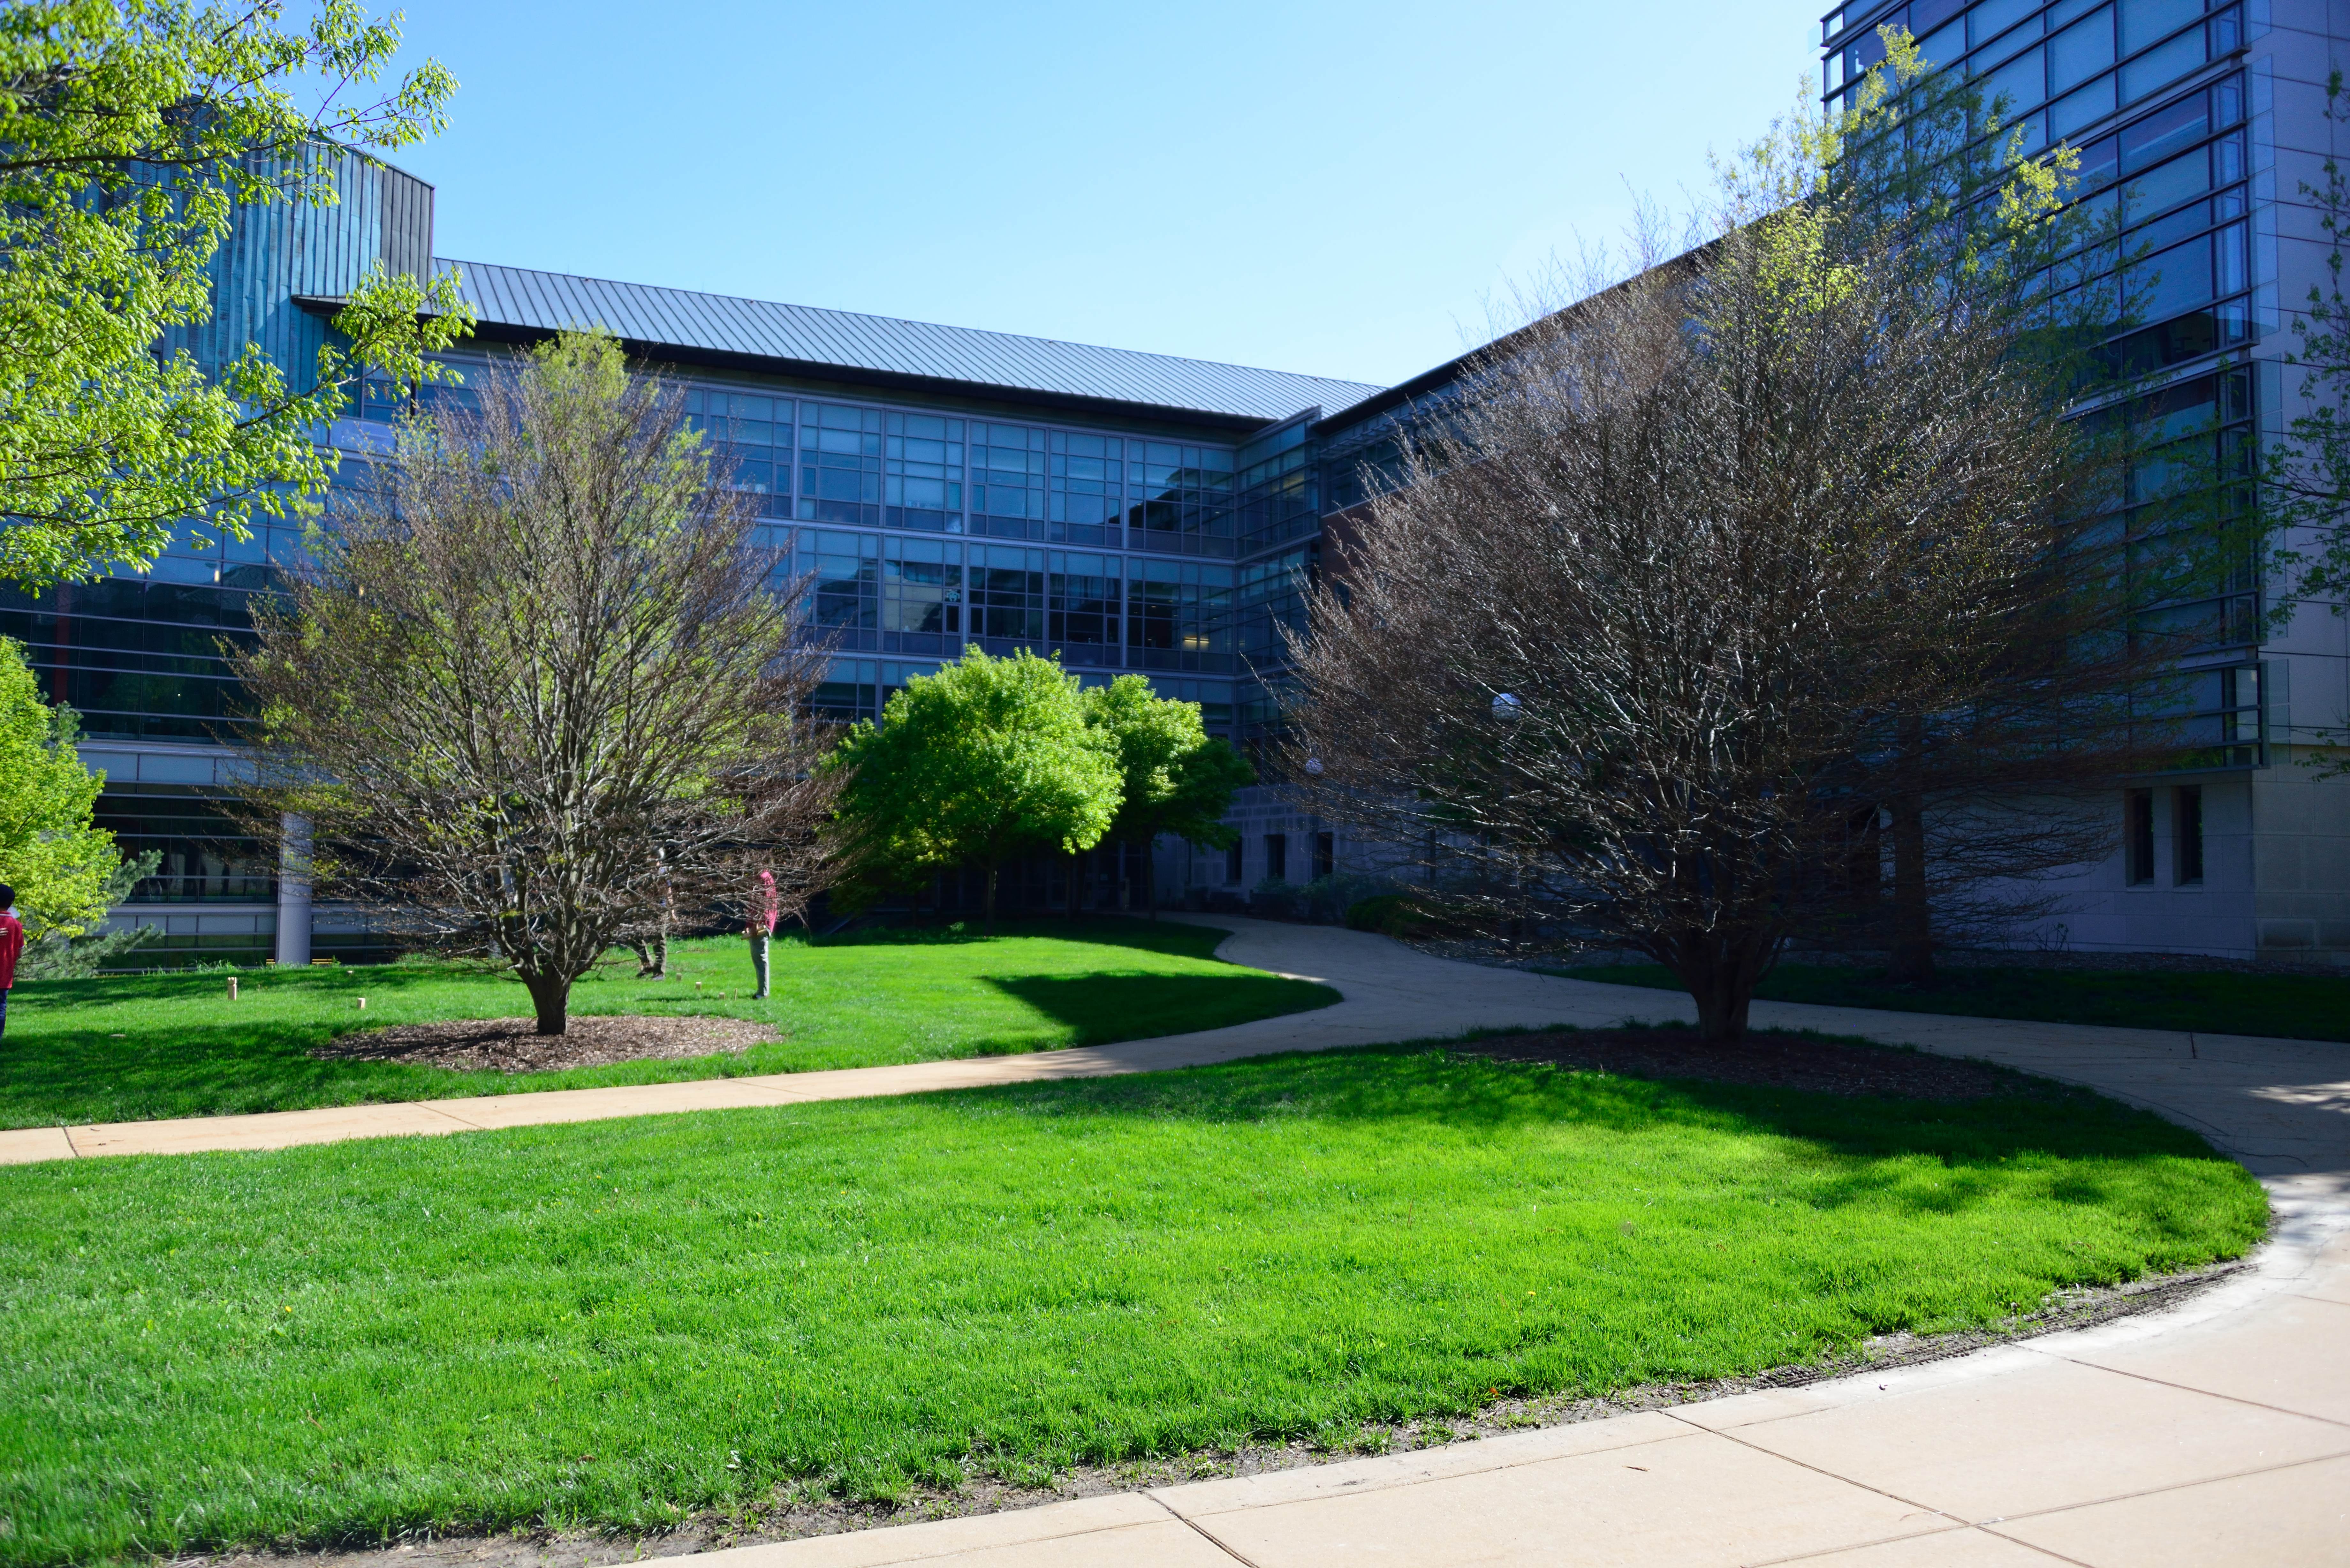 Thomas M. Siebel Center for Computer Science, Champaign, IL